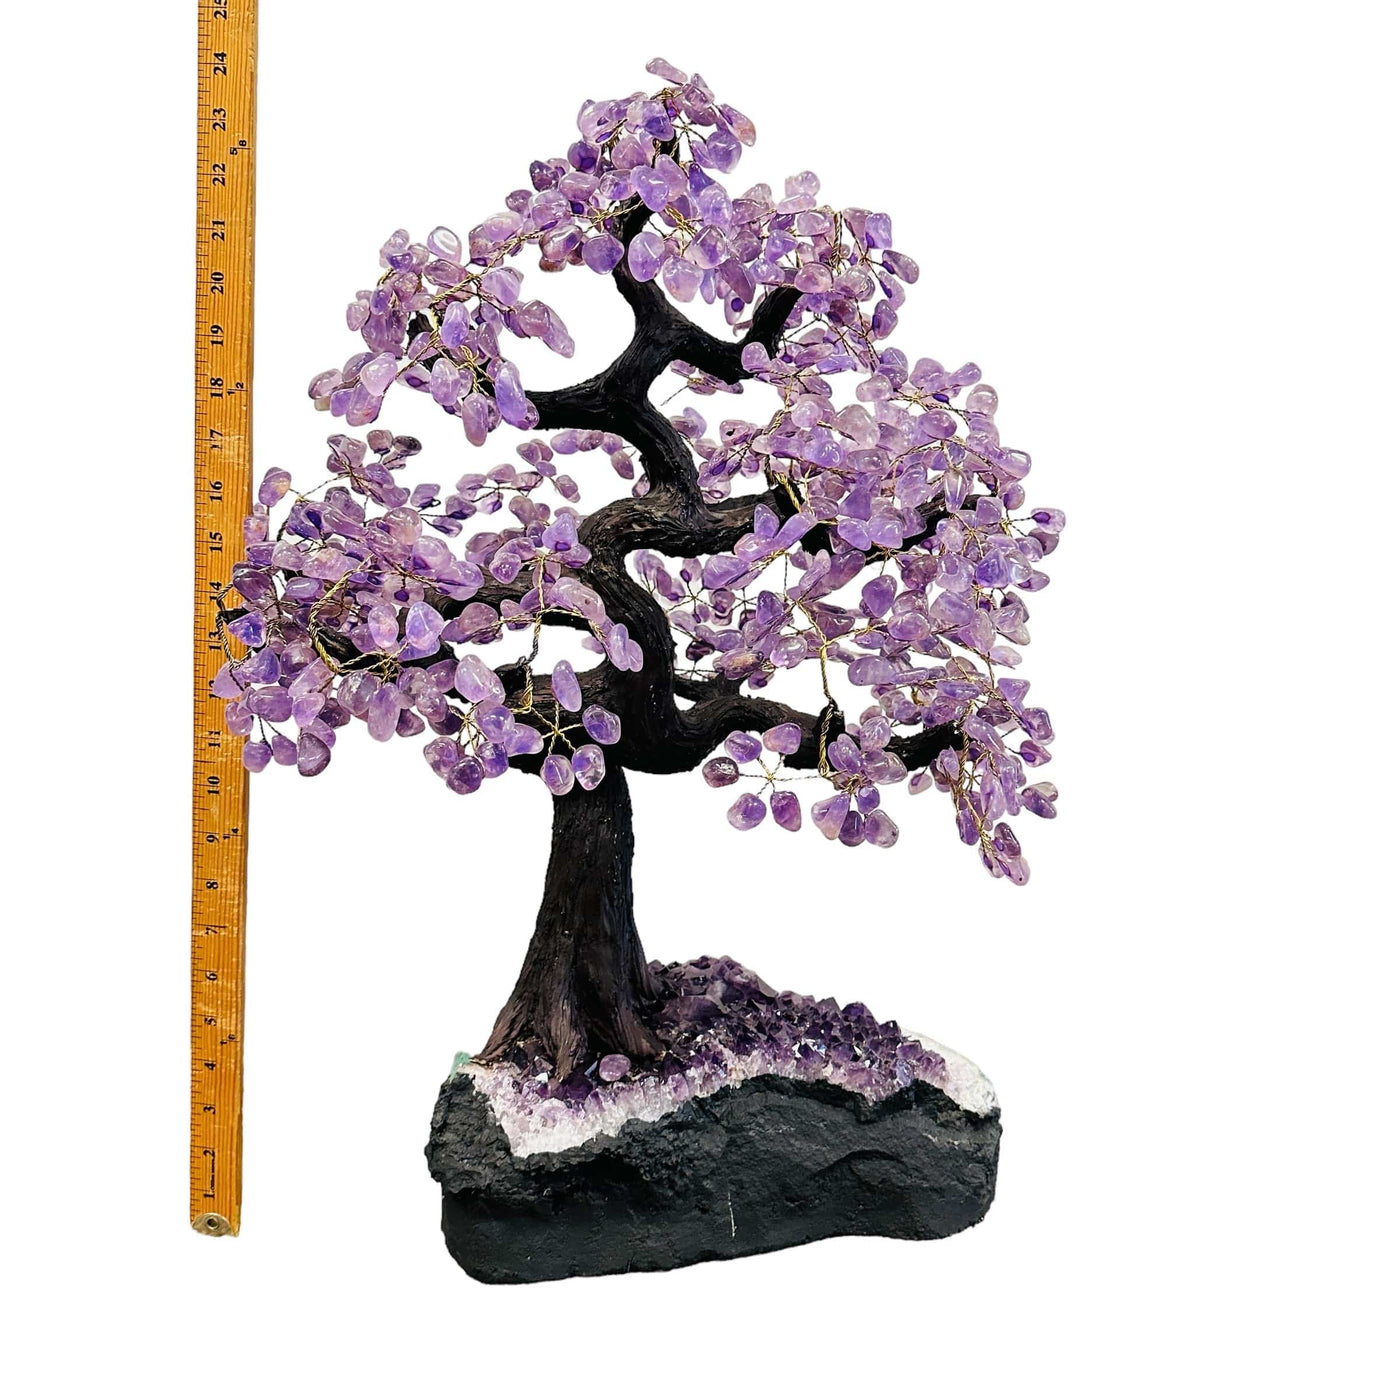 amethyst tree on amethyst base next to a ruler for size reference